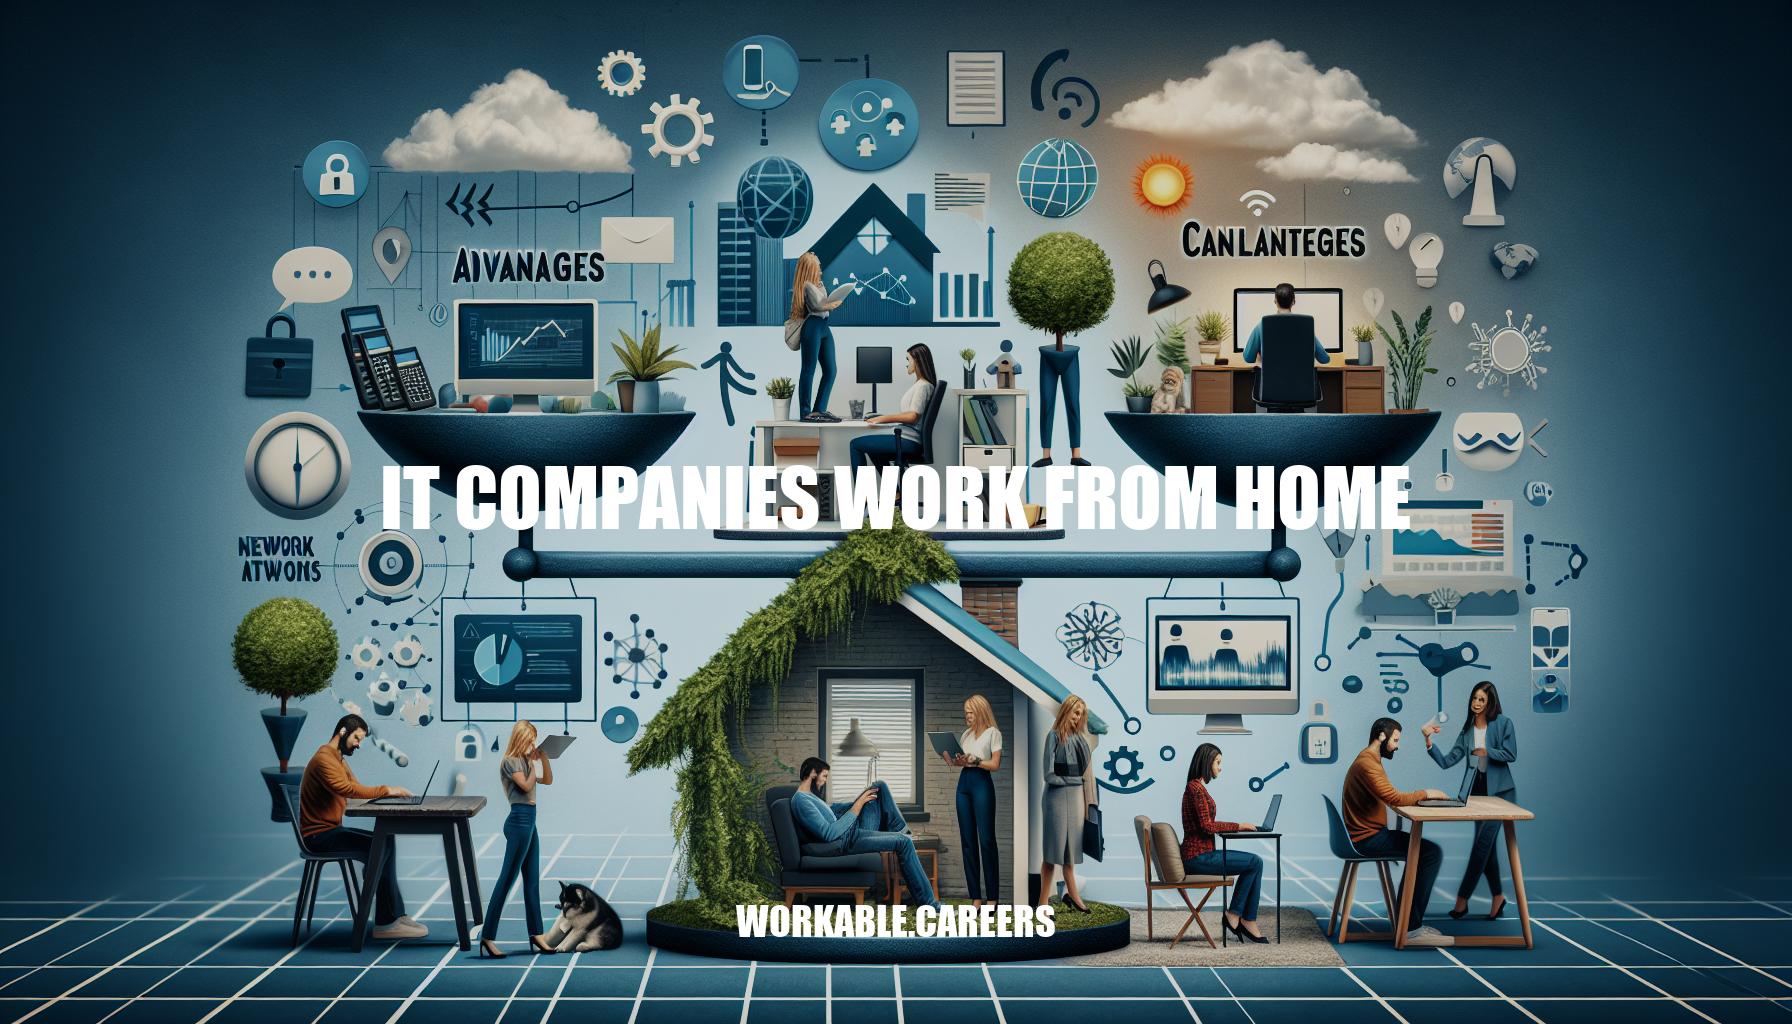 IT Companies Work From Home: Advantages and Challenges